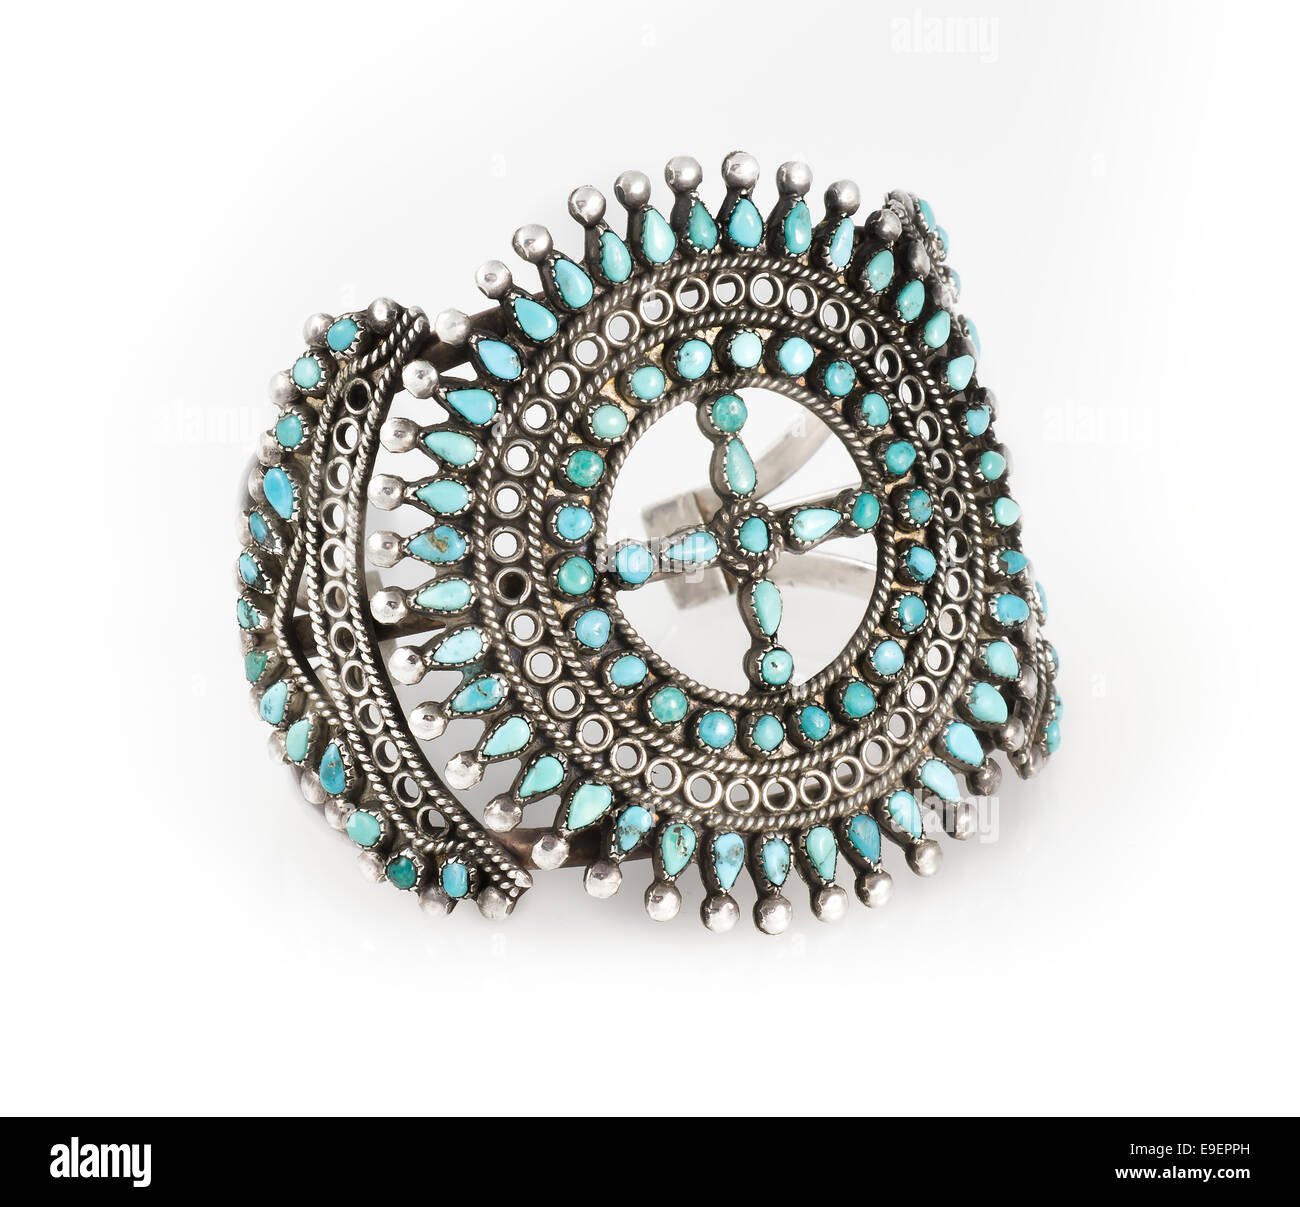 Zuni, Native American Turquoise and Silver Cuff Bracelet. Stock Photo